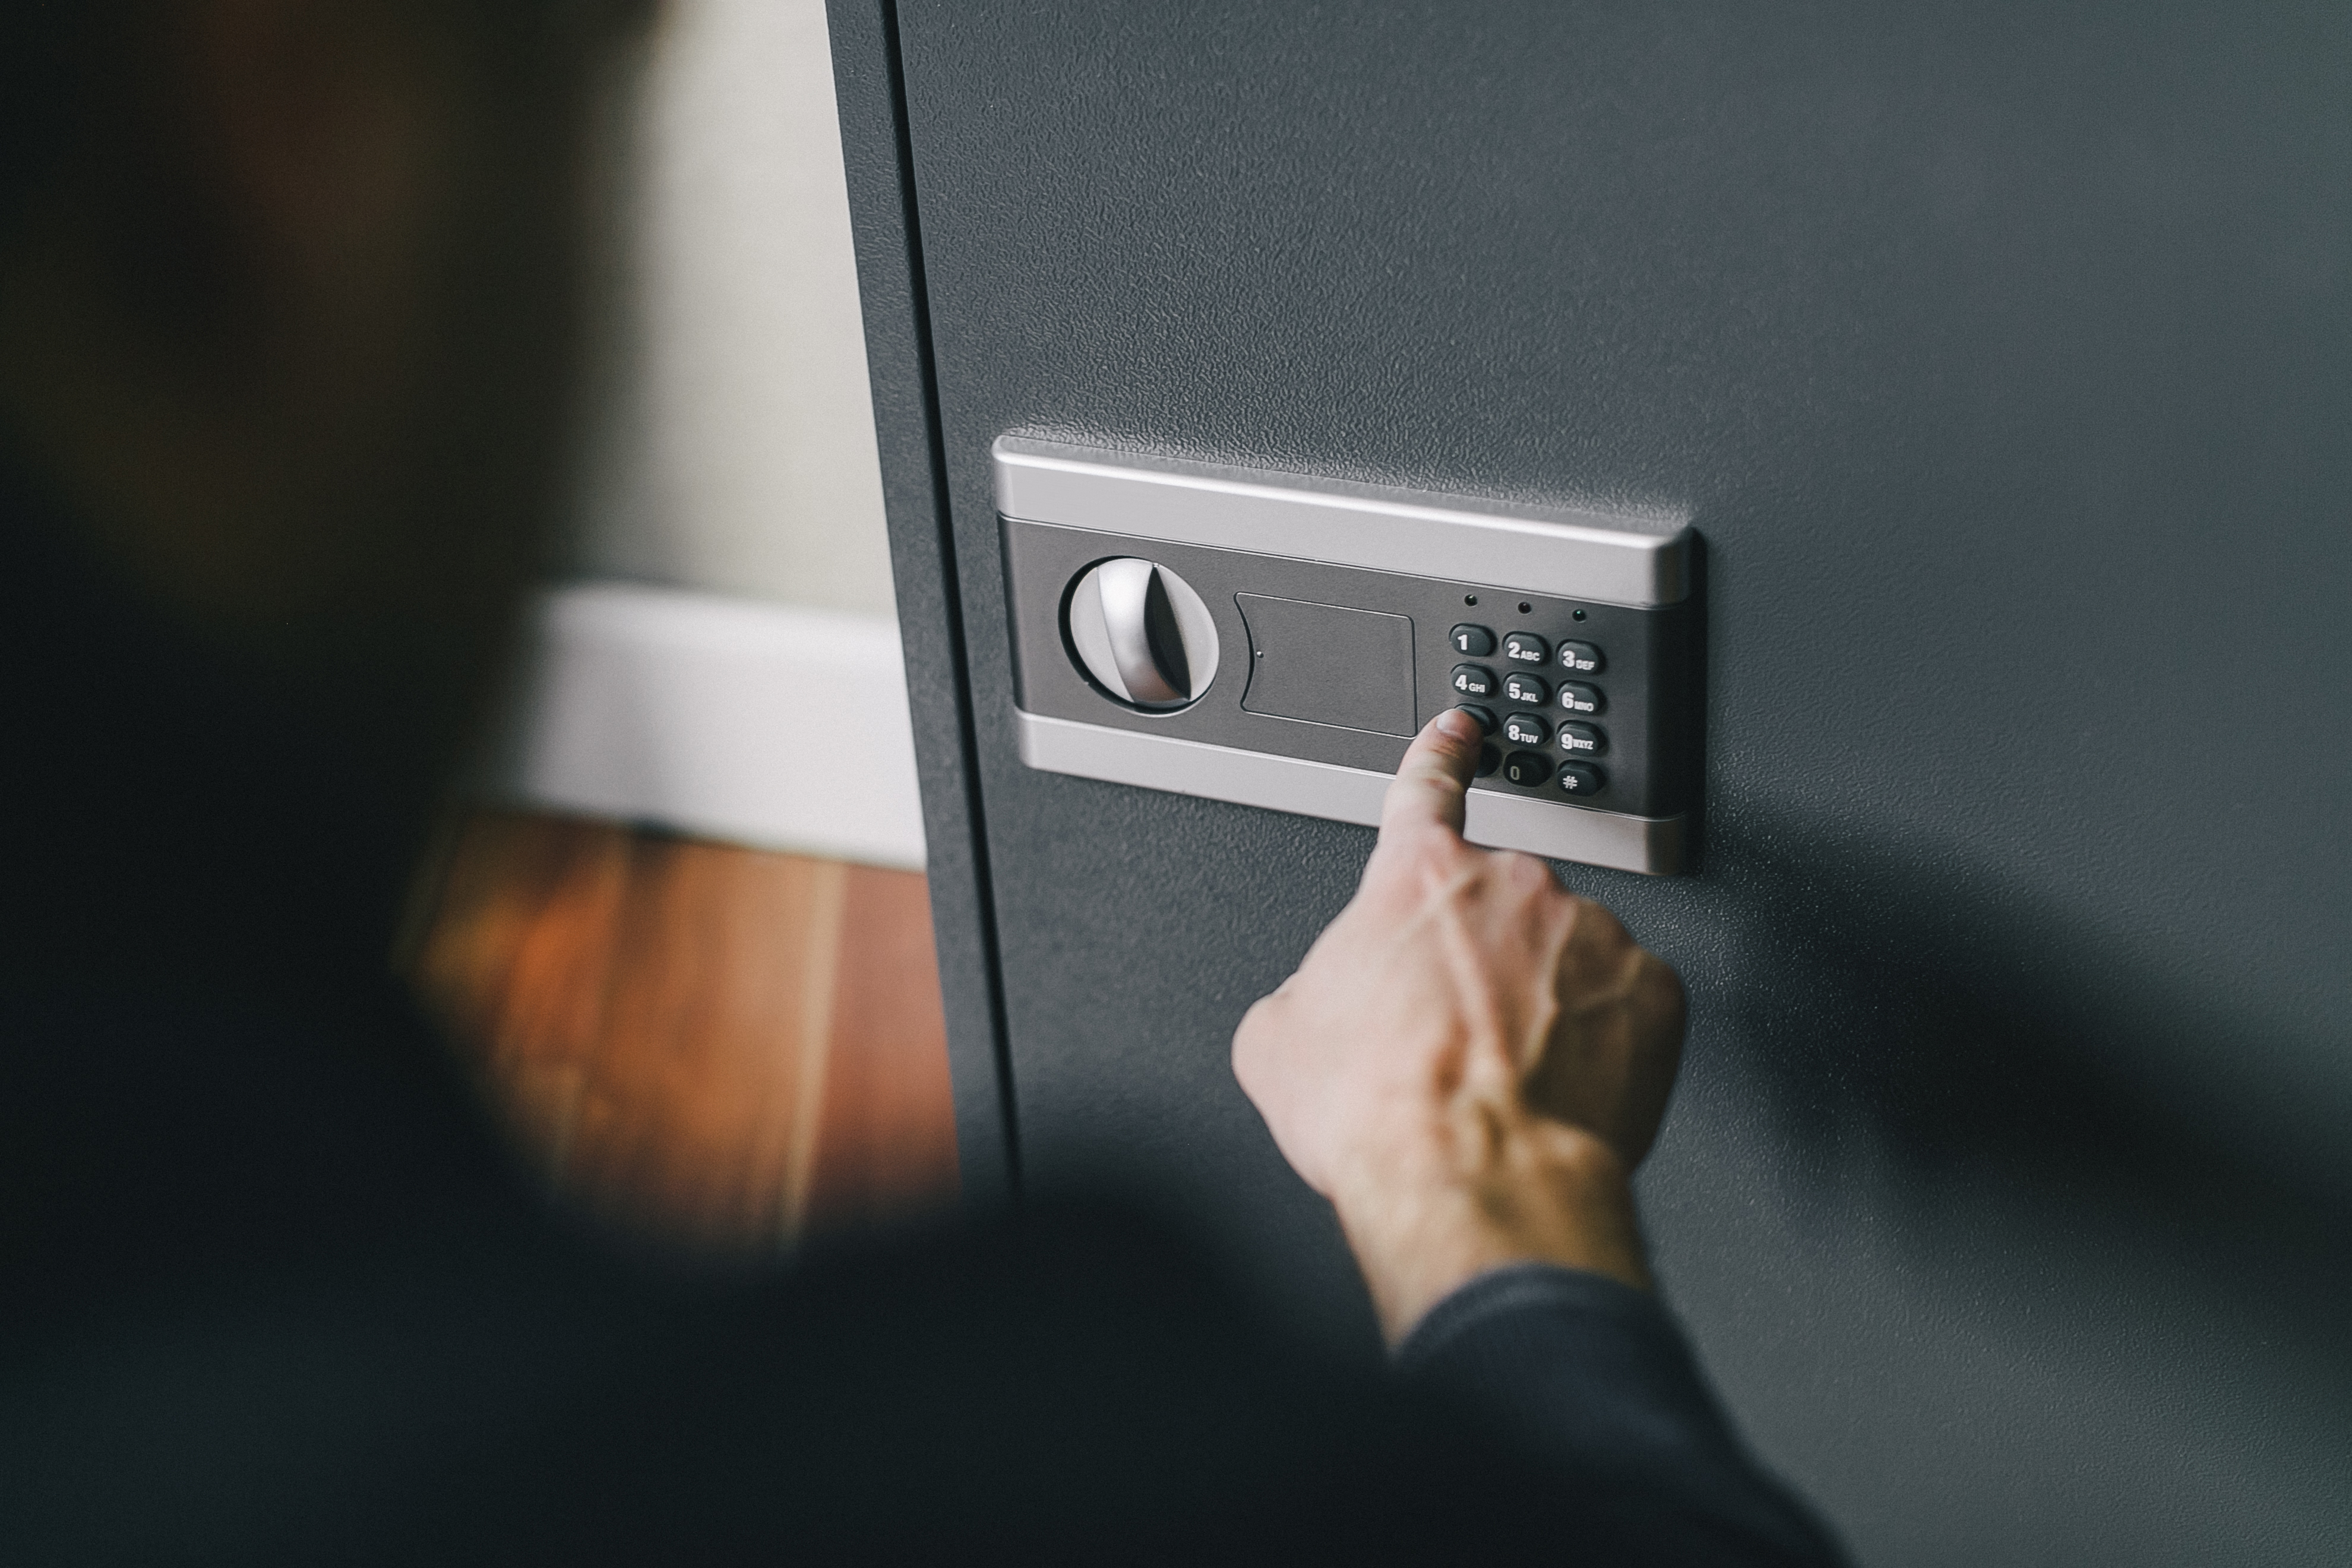 A person opening a safe | Source: Shutterstock